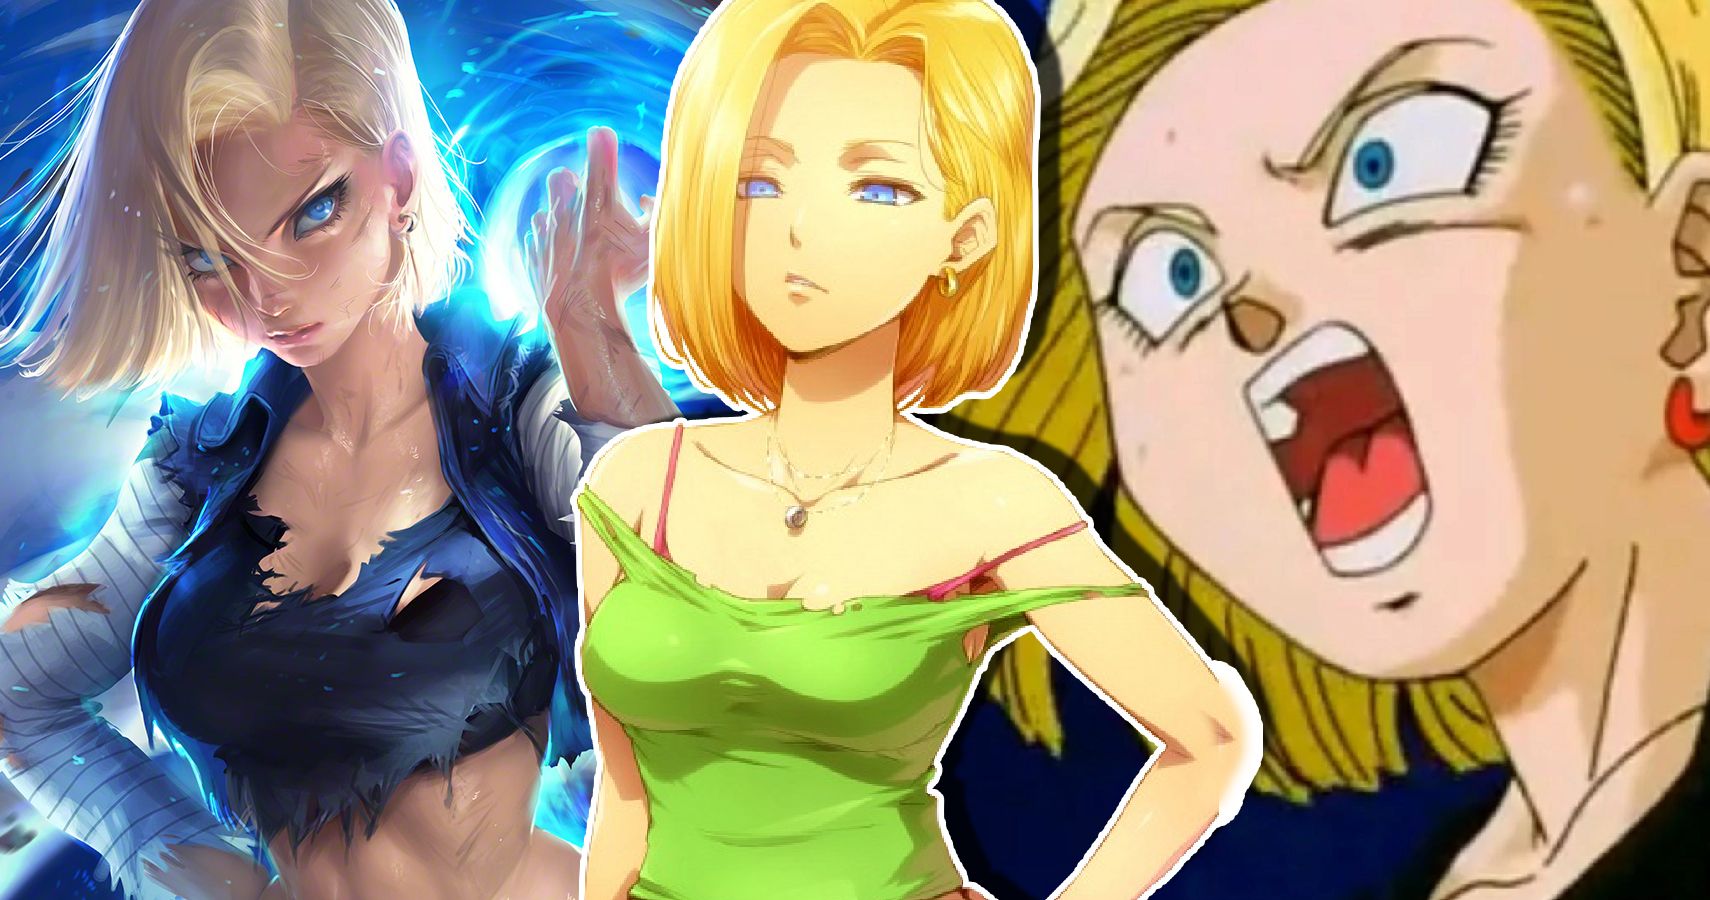 Powerful Facts That Make Android 18 From Dragon Ball Too Scary